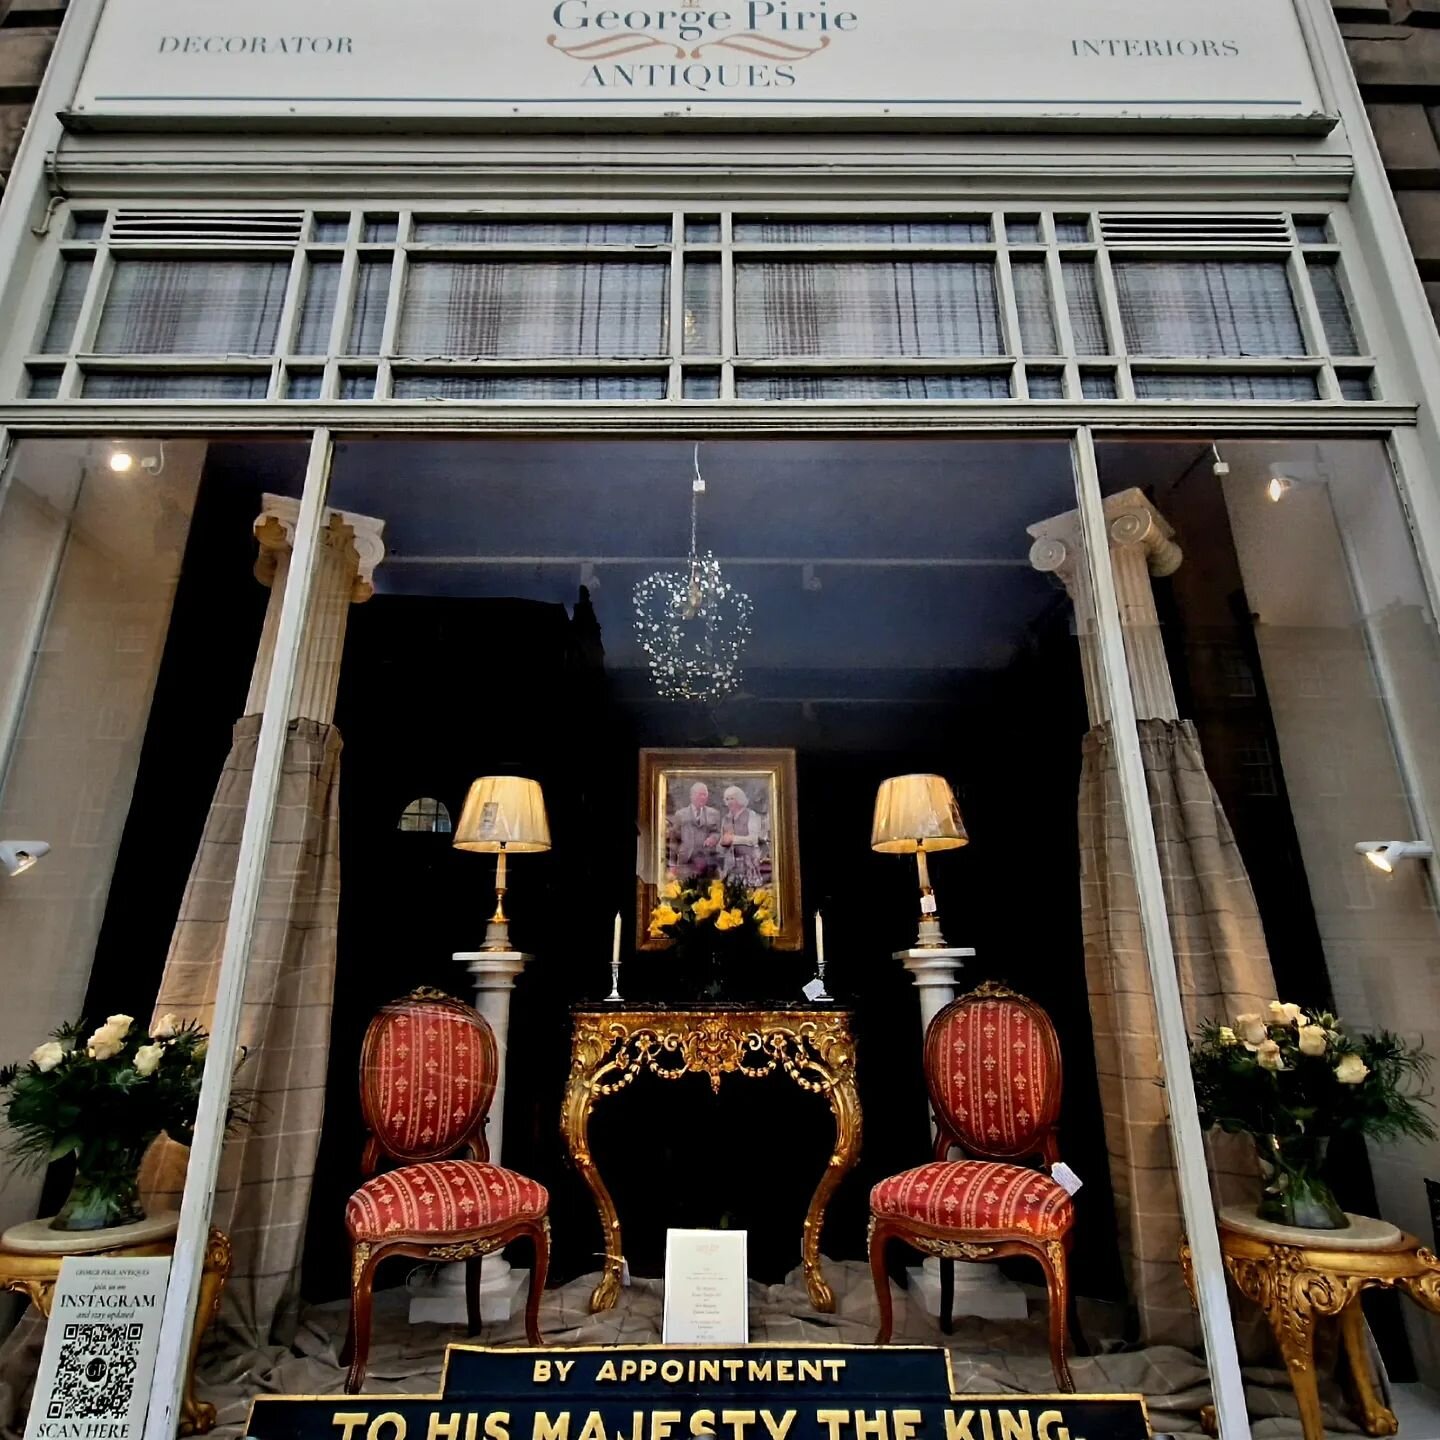 We are fascinated by history and tradition at George Pirie Antiques, so it's no surprise that our window is appropriately dressed to celebrate The Coronation of Their Majesties The King and The Queen Consort&nbsp;- why not pop by and see us while you